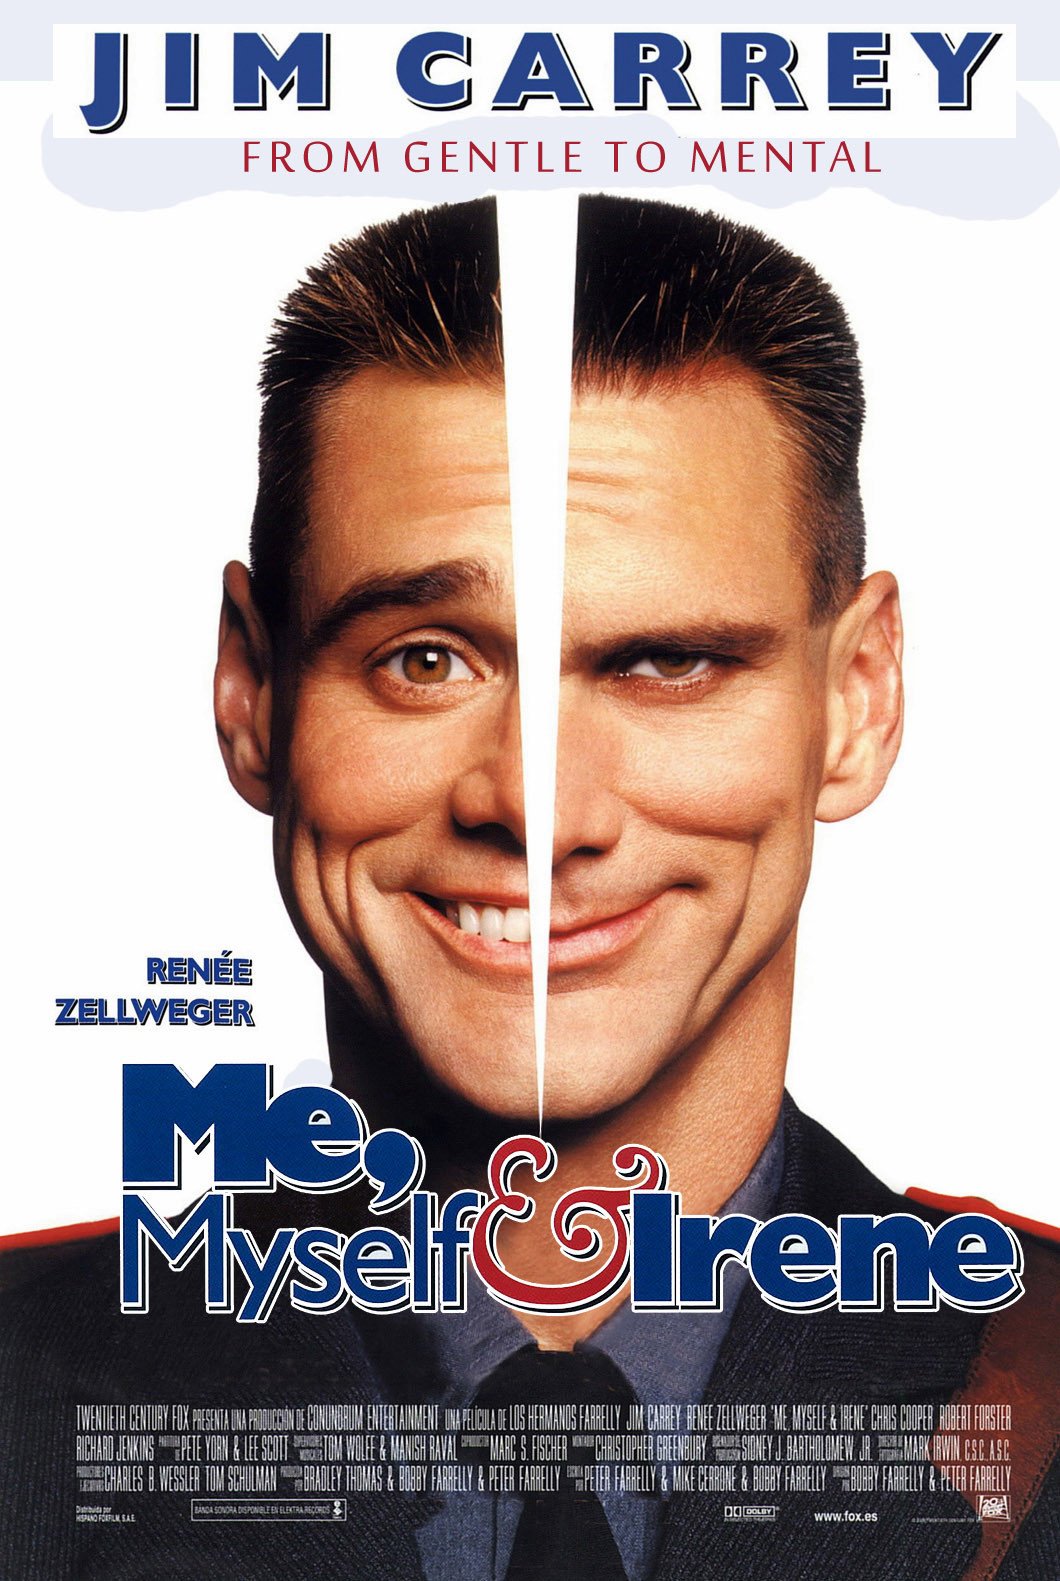 Poster of the movie Me, Myself and Irene